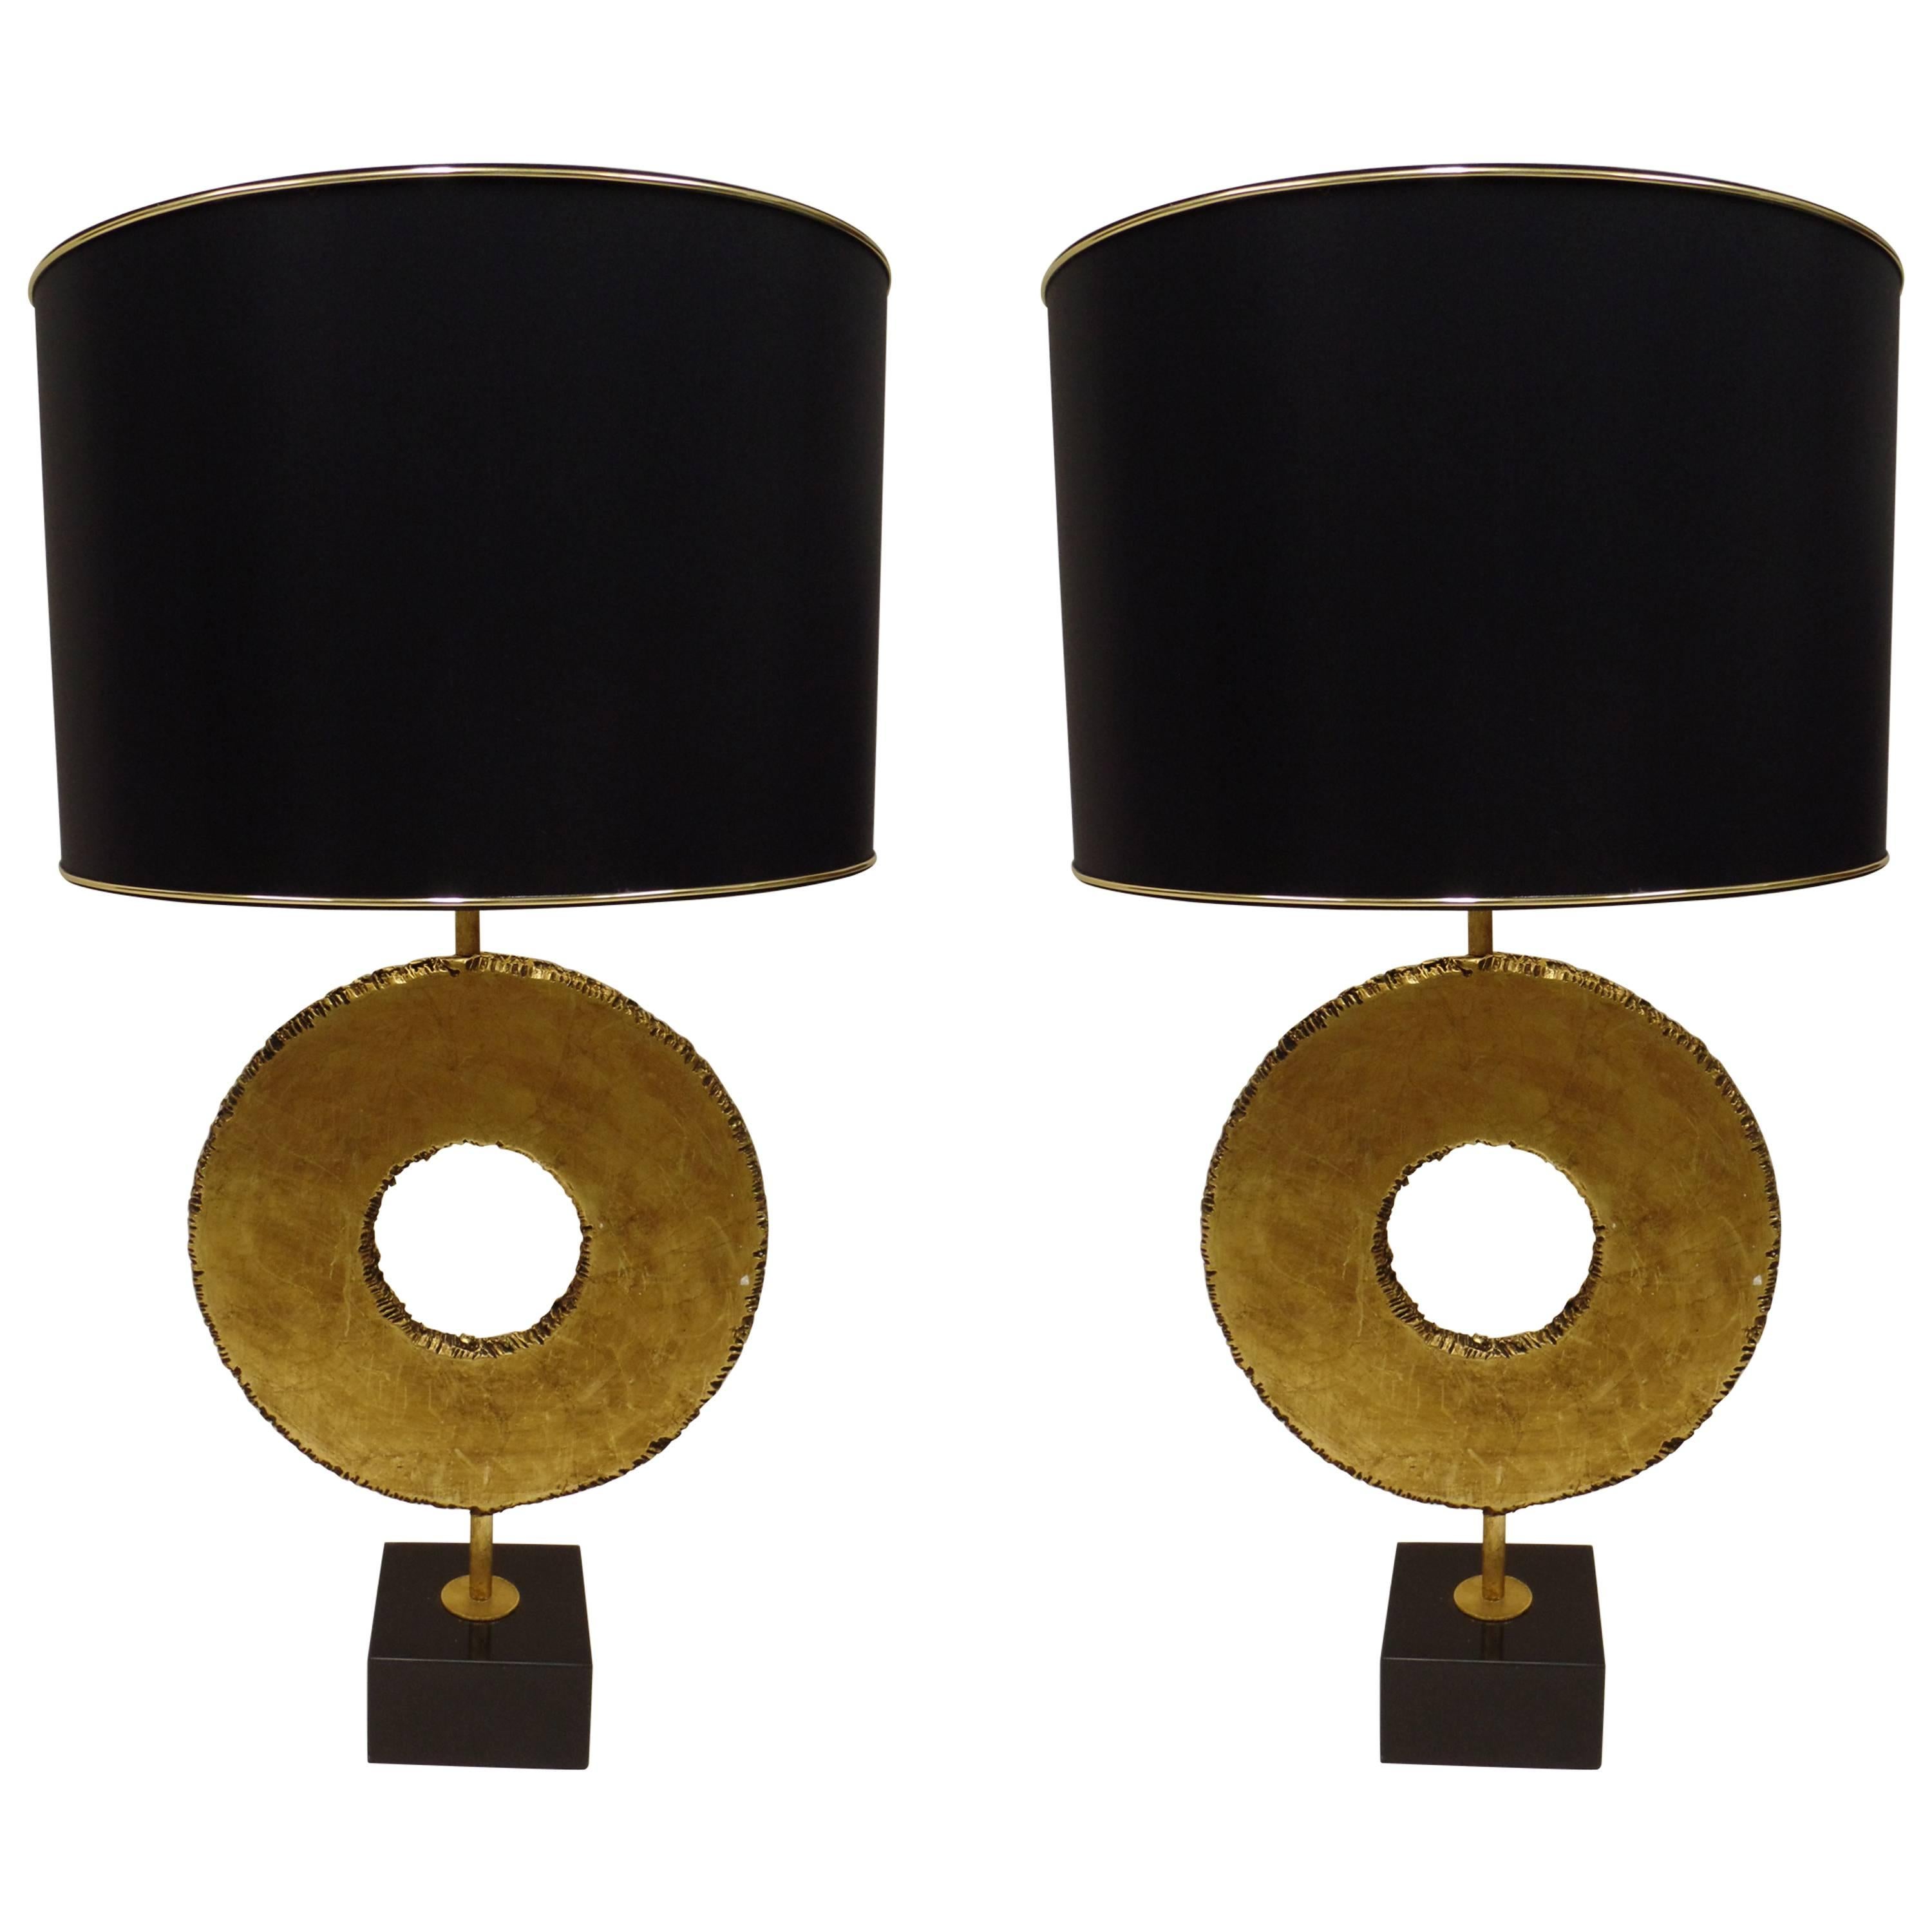 Pair of Italian Mid-Century Modern table lamps in the Brutalist spirit by Florentine sculptor and designer, Giovanni Banci. 

The pieces are in hand-hammered and forged iron with gilt bronze. Sharp hammer marks are left around the Minimalist ring